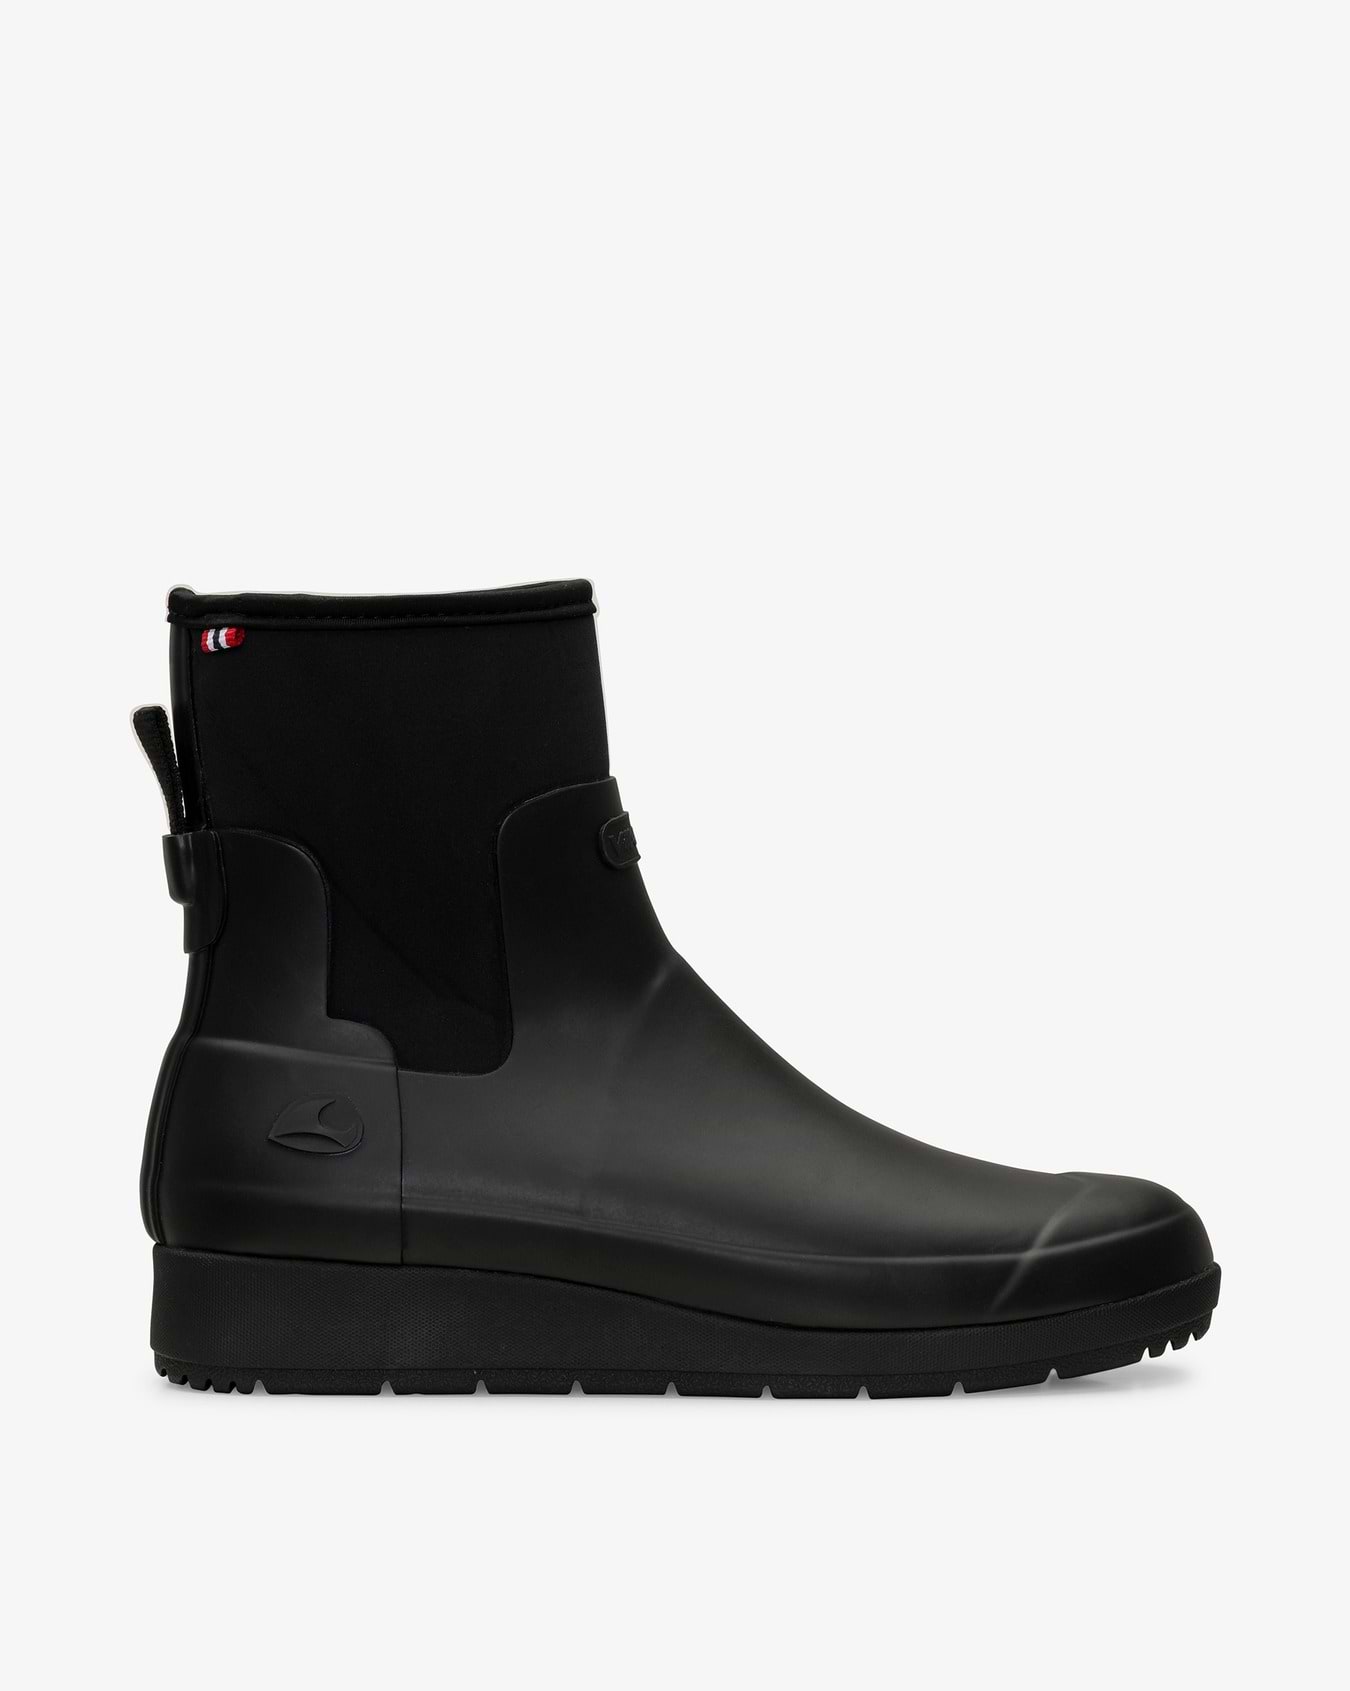 Stockholm Neo Black Rubber Boot